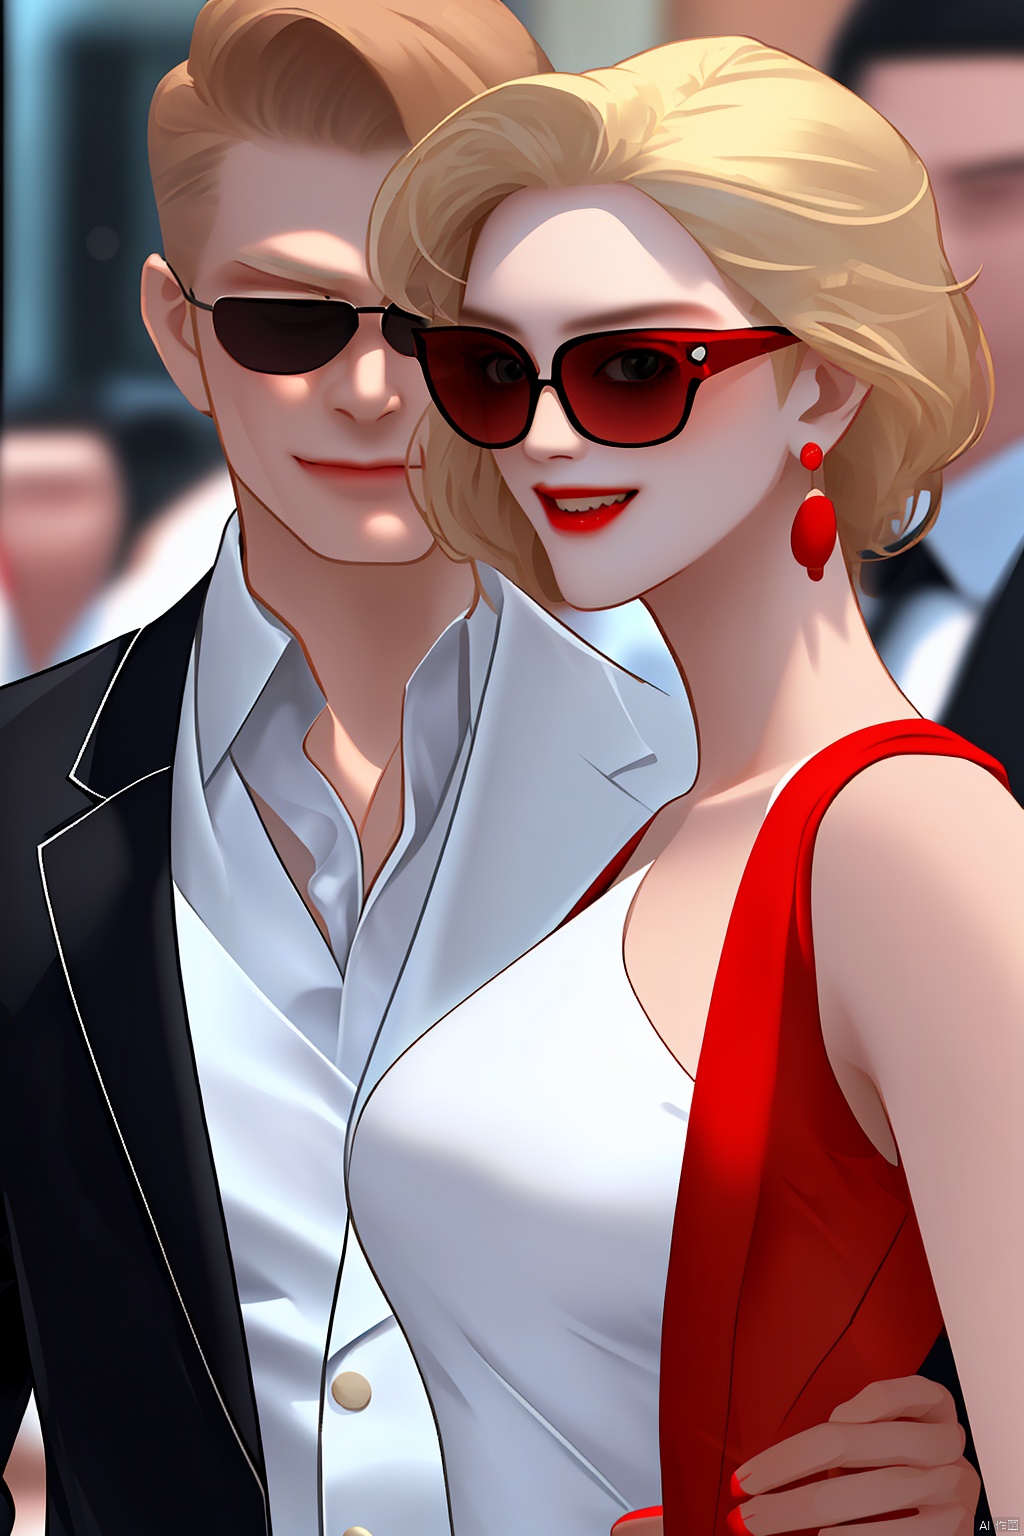 blonde hair, sunglass, pocket, white suits, red tie, smile, anger, look at viewer, rounded shoulders, woman